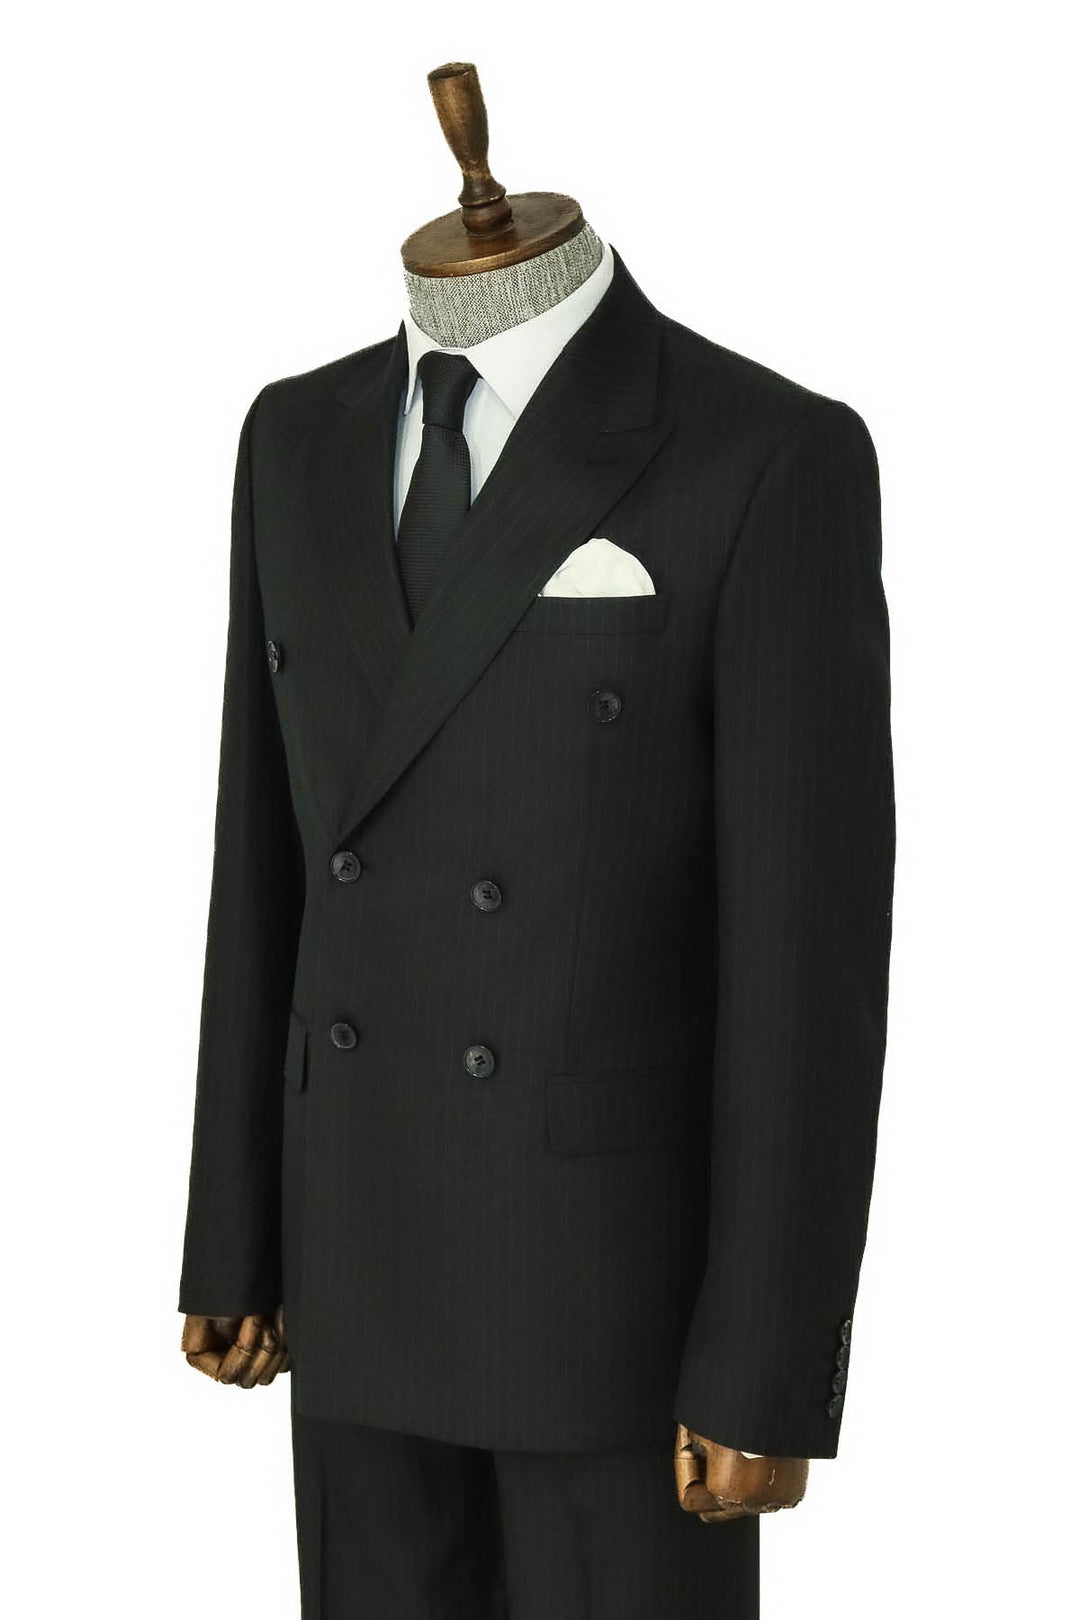 Striped Wide Collar Black Men Double-Breasted Suit - Wessi